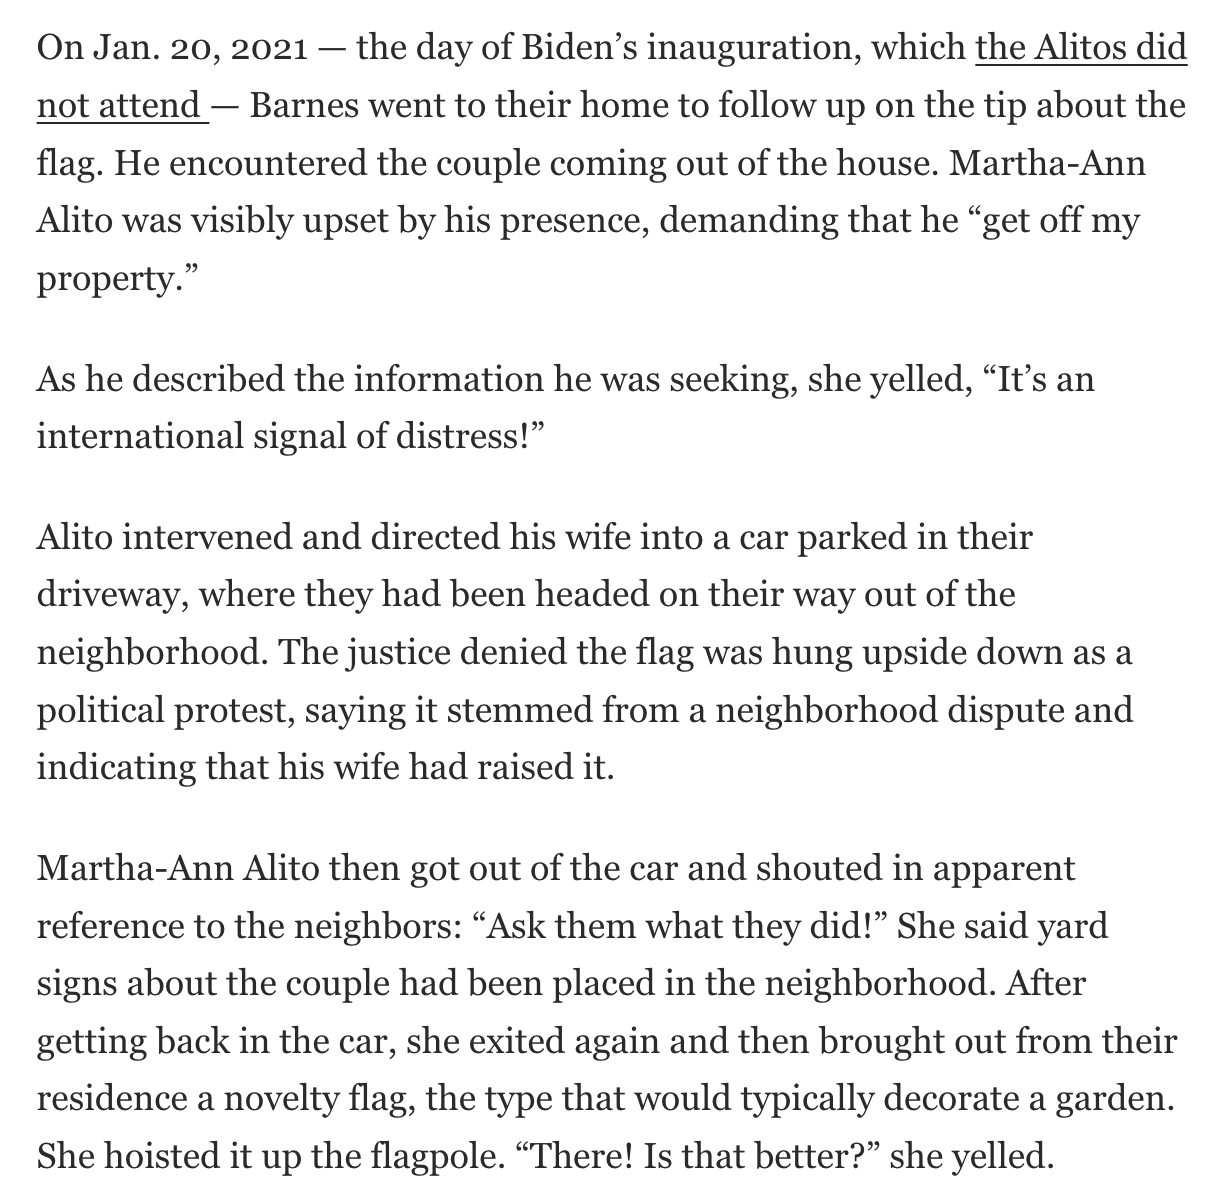 On Jan. 20, 2021 — the day of Biden’s inauguration, which the Alitos did not attend — Barnes went to their home to follow up on the tip about the flag. He encountered the couple coming out of the house. Martha-Ann Alito was visibly upset by his presence, demanding that he “get off my property.”  As he described the information he was seeking, she yelled, “It’s an international signal of distress!”  Alito intervened and directed his wife into a car parked in their driveway, where they had been headed on their way out of the neighborhood. The justice denied the flag was hung upside down as a political protest, saying it stemmed from a neighborhood dispute and indicating that his wife had raised it.  Martha-Ann Alito then got out of the car and shouted in apparent reference to the neighbors: “Ask them what they did!” She said yard signs about the couple had been placed in the neighborhood. After getting back in the car, she exited again and then brought out from their residence a novelty flag, the type that would typically decorate a garden. She hoisted it up the flagpole. “There! Is that better?” she yelled.